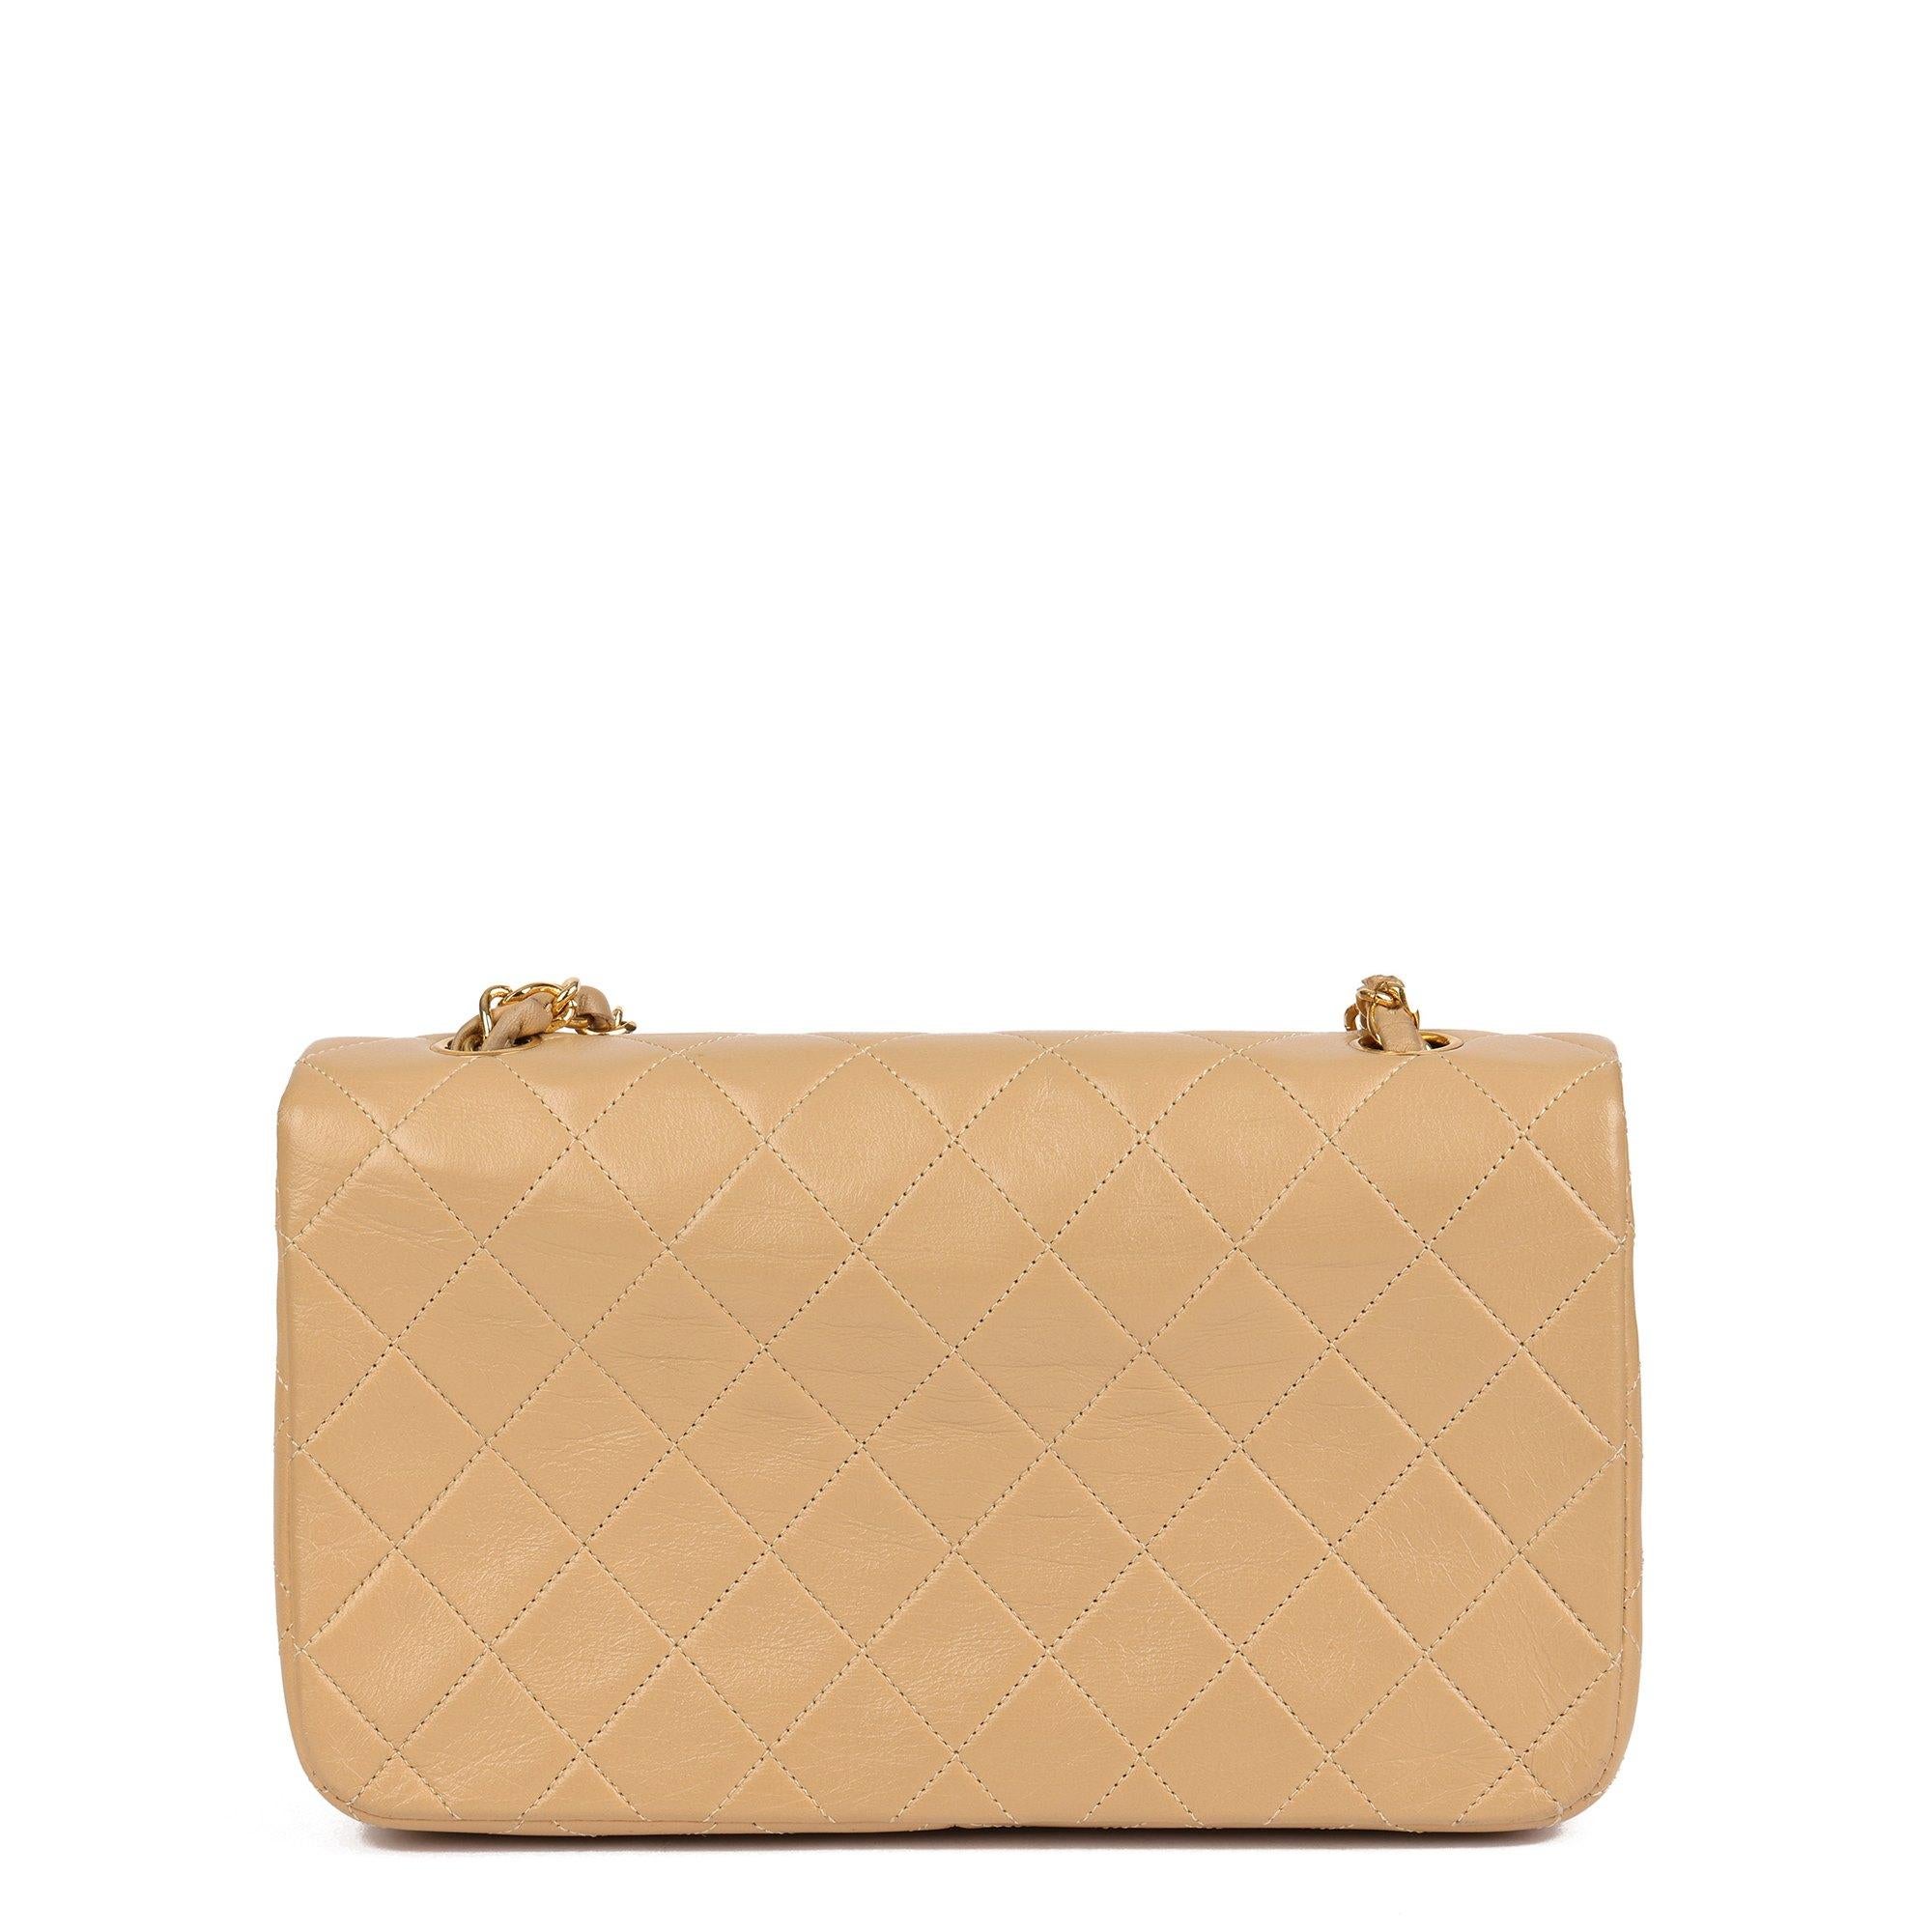 CHANEL Beige Quilted Lambskin Vintage Small Classic Single Full Flap Bag 6